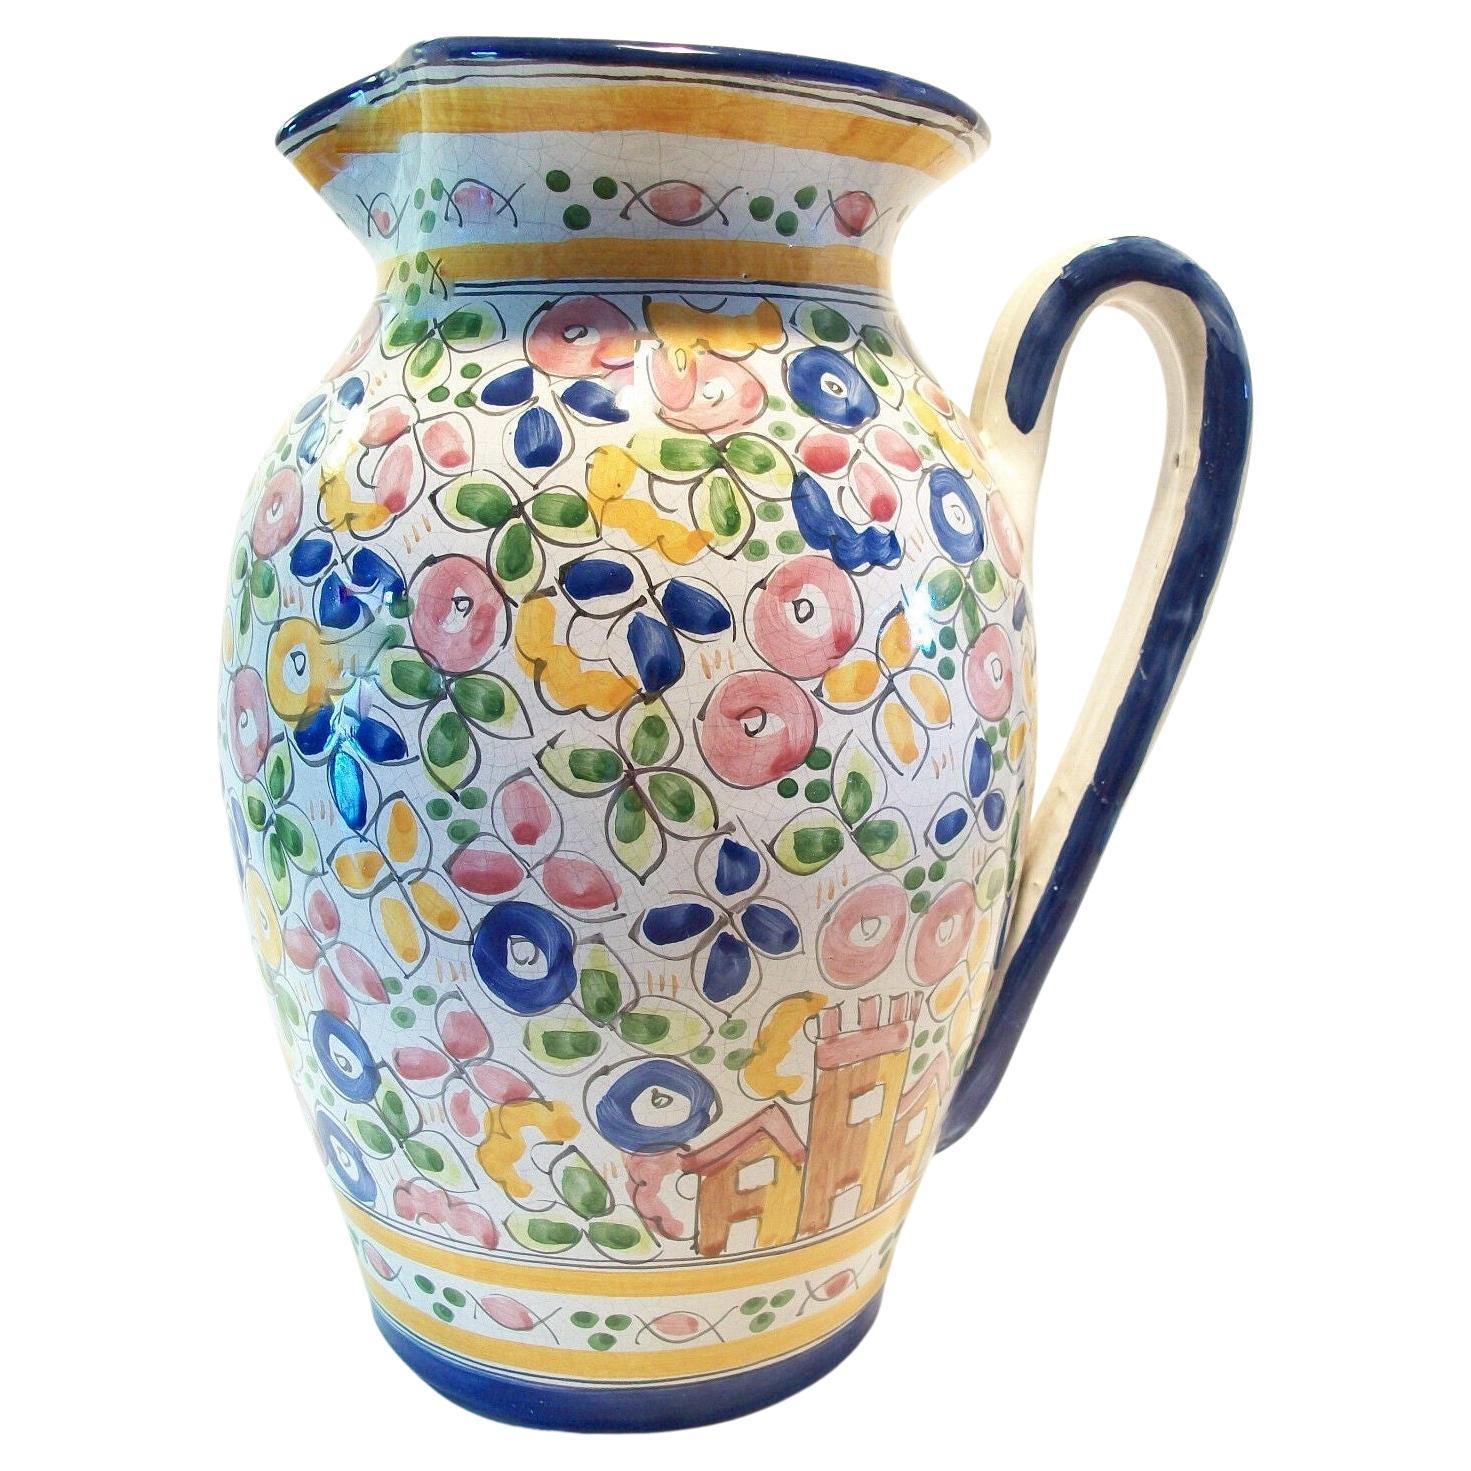 Vintage Majolica Pitcher - Hand Painted Tin Glaze - Portugal - circa 1943 For Sale